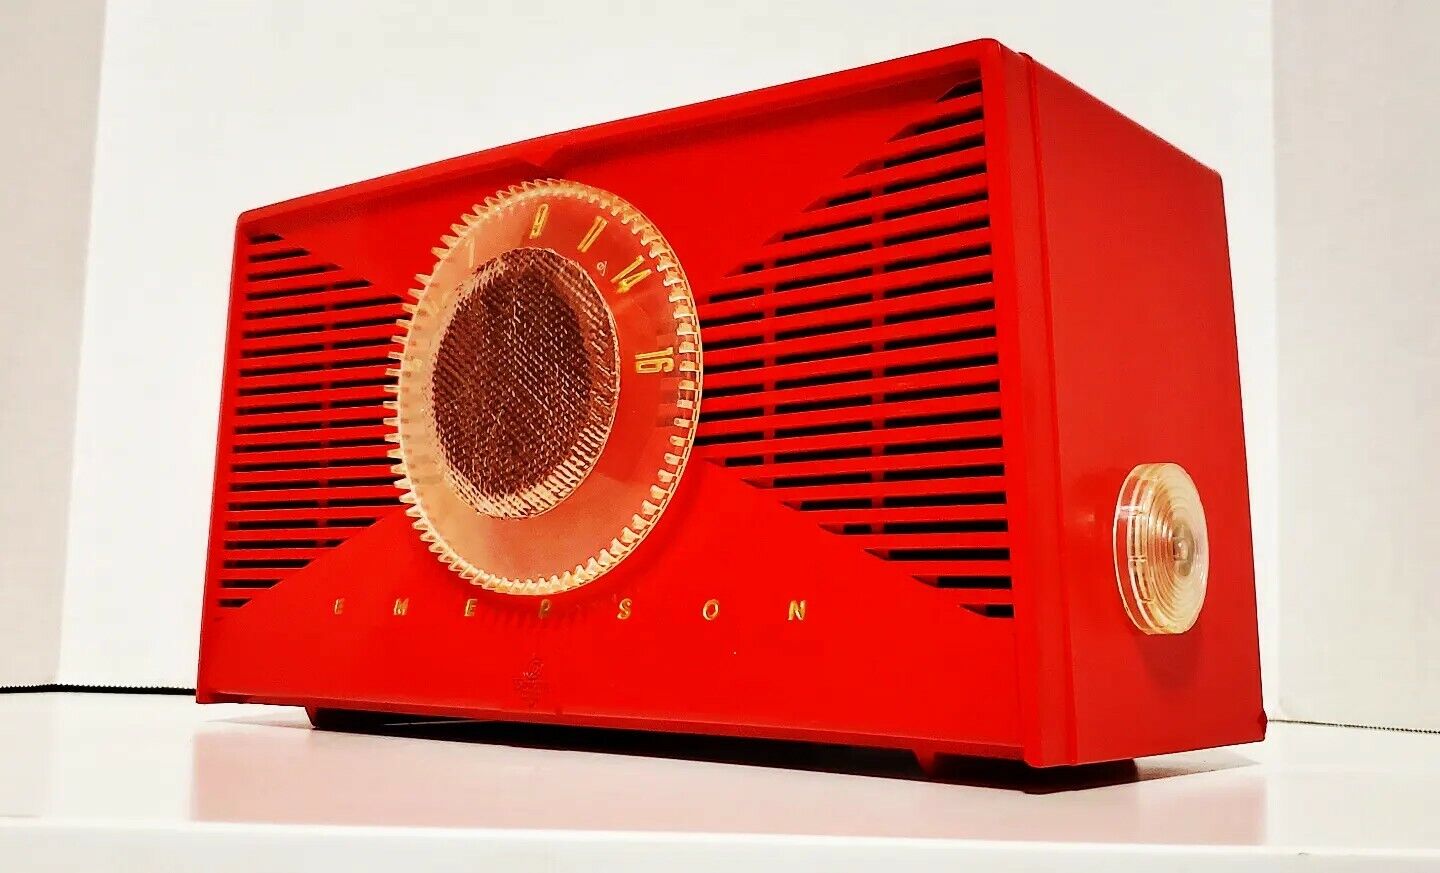 1955 Emerson 812 B AM Tube Radio Atomic Red Excellent 